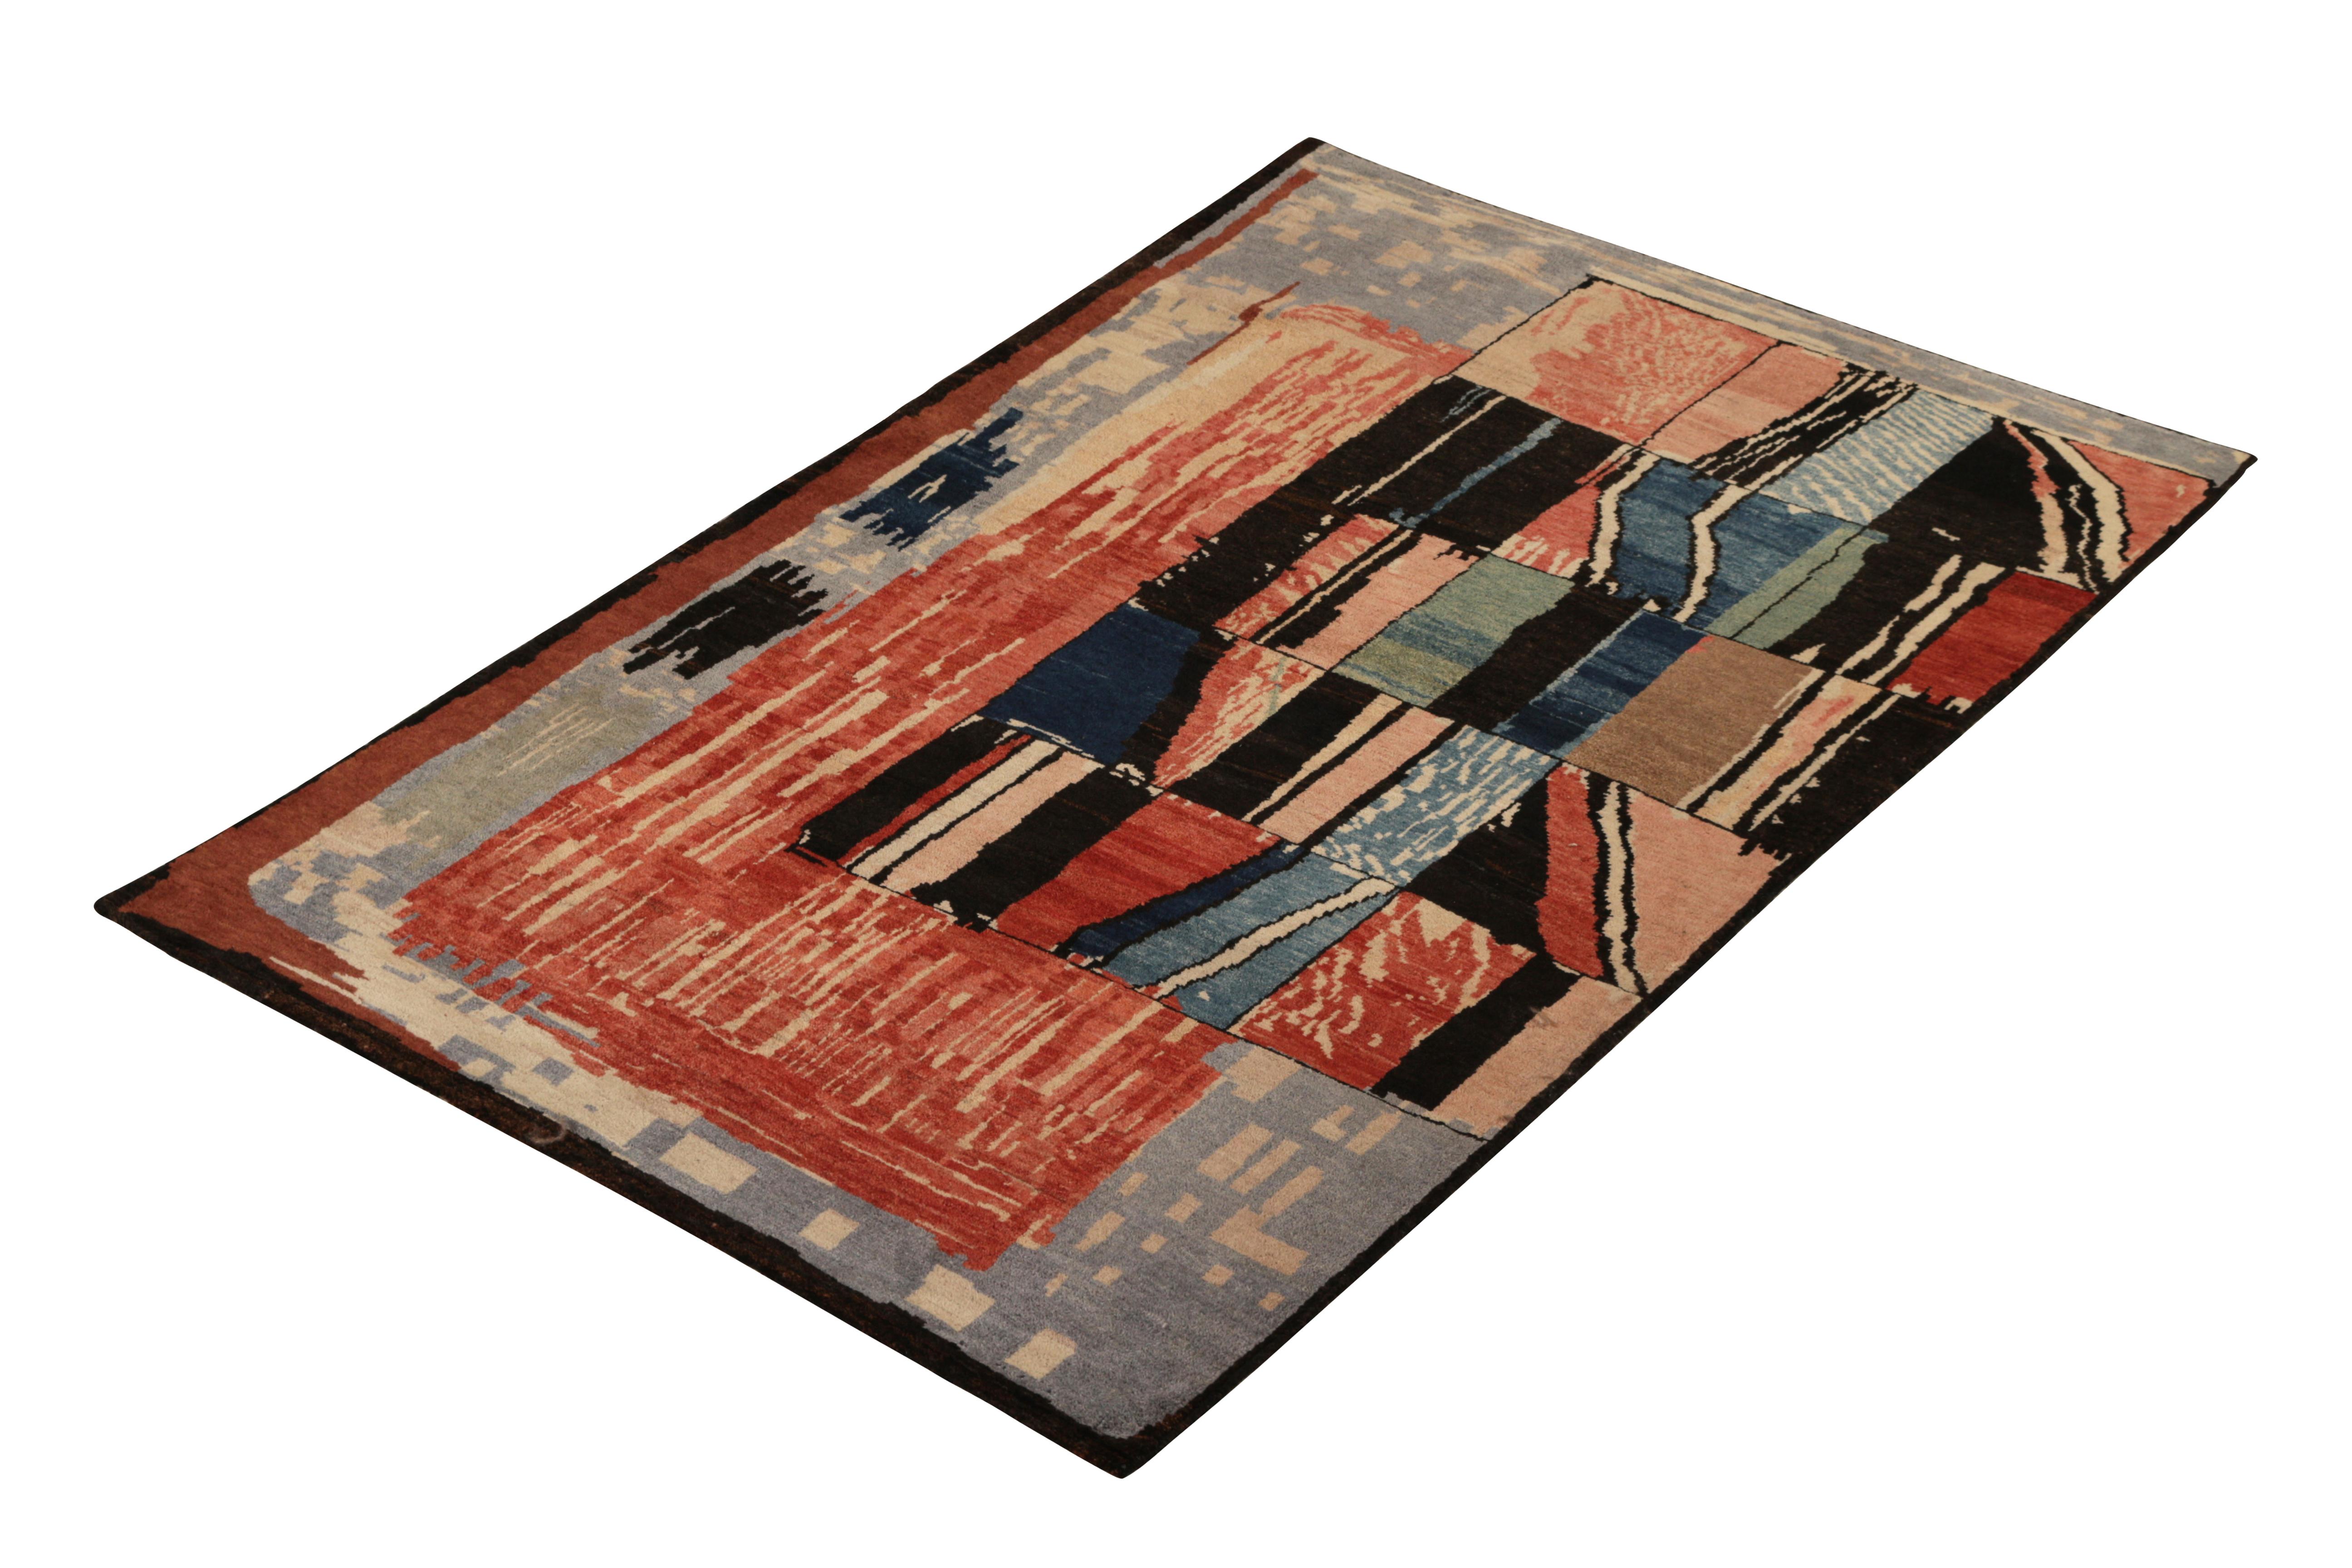 Hand knotted in wool originating from the works of Teddy Sumner circa 1990, this abstract rug employs an artisan approach to geometry with a striking play of red, blue, and multicolor accents ideal to the painterly graph and 4 x 6 rug scale. The